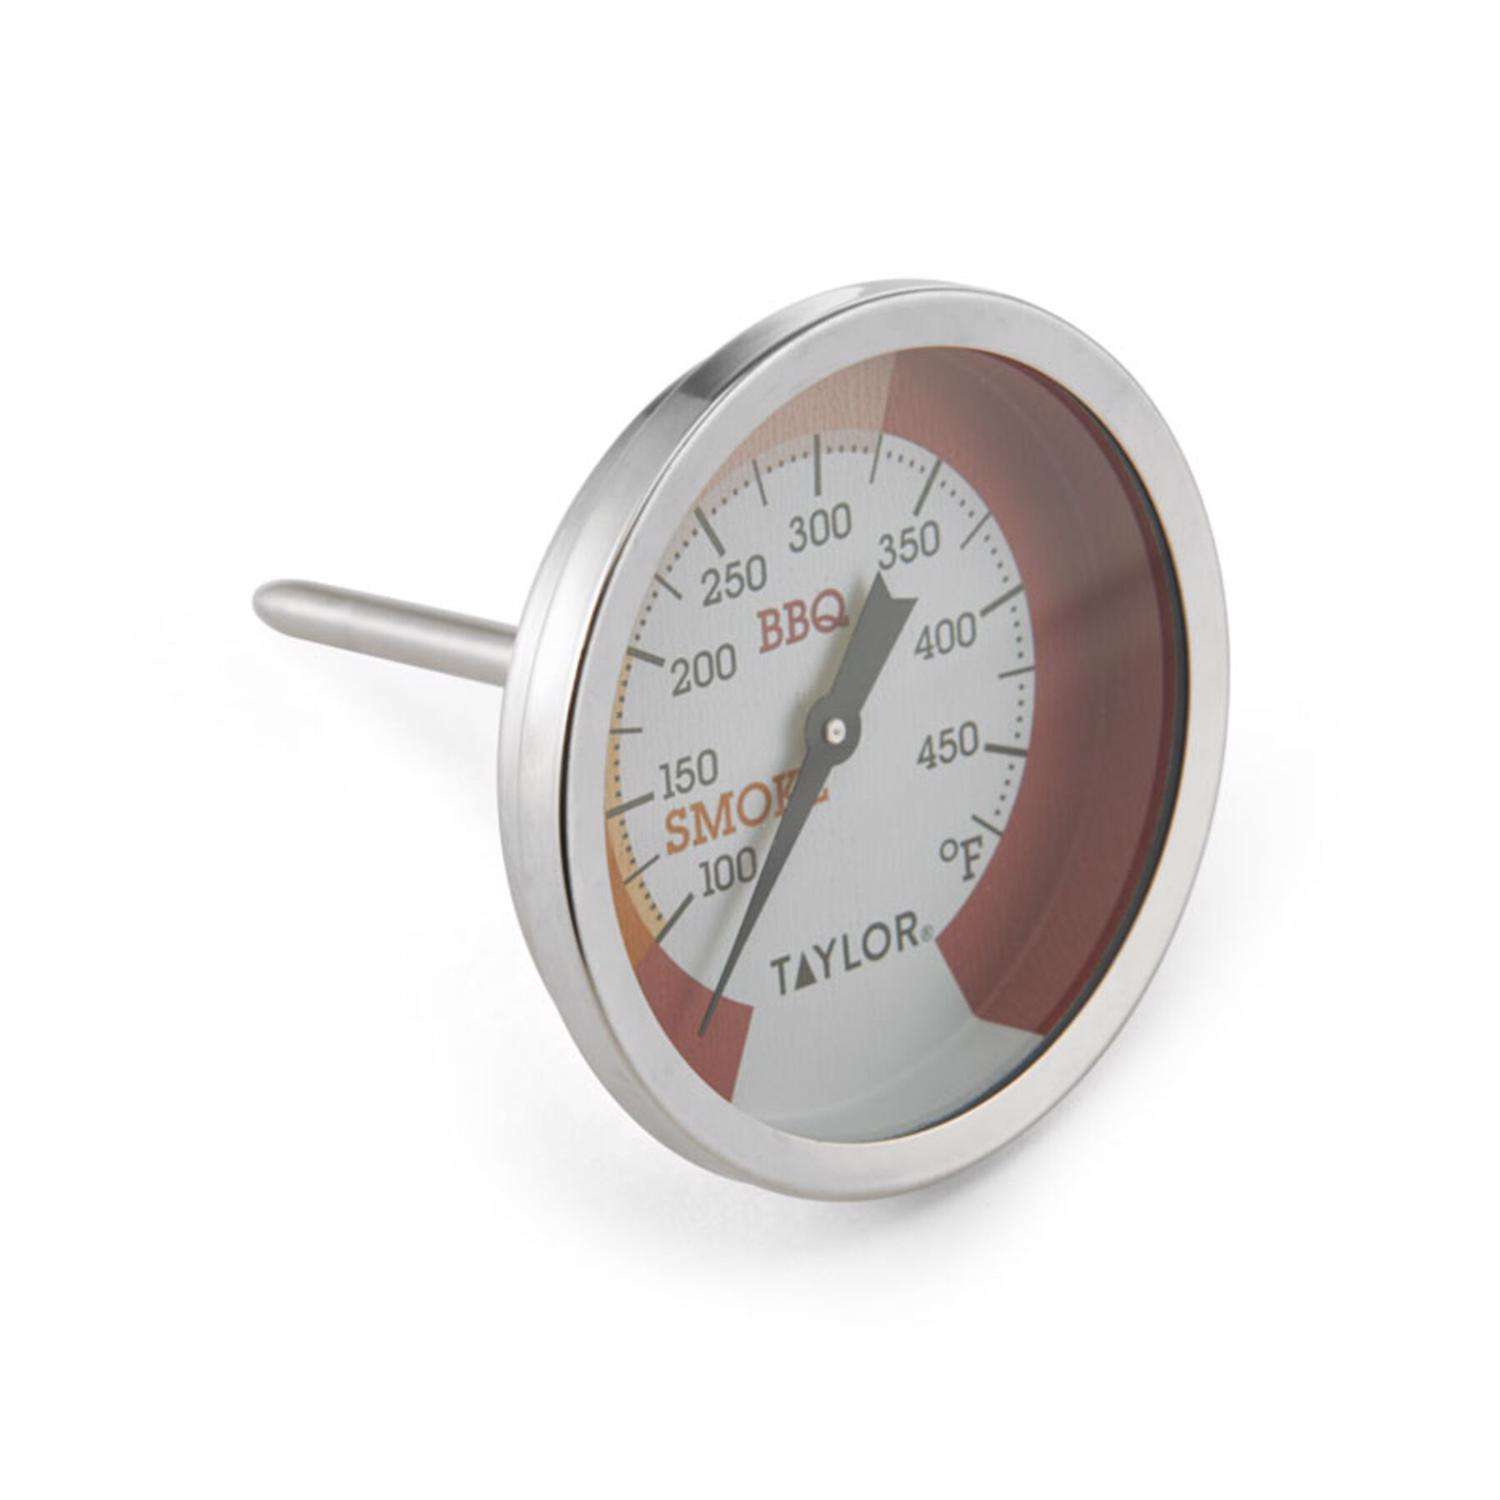 Taylor Thermometers - Big Plate Restaurant Supply